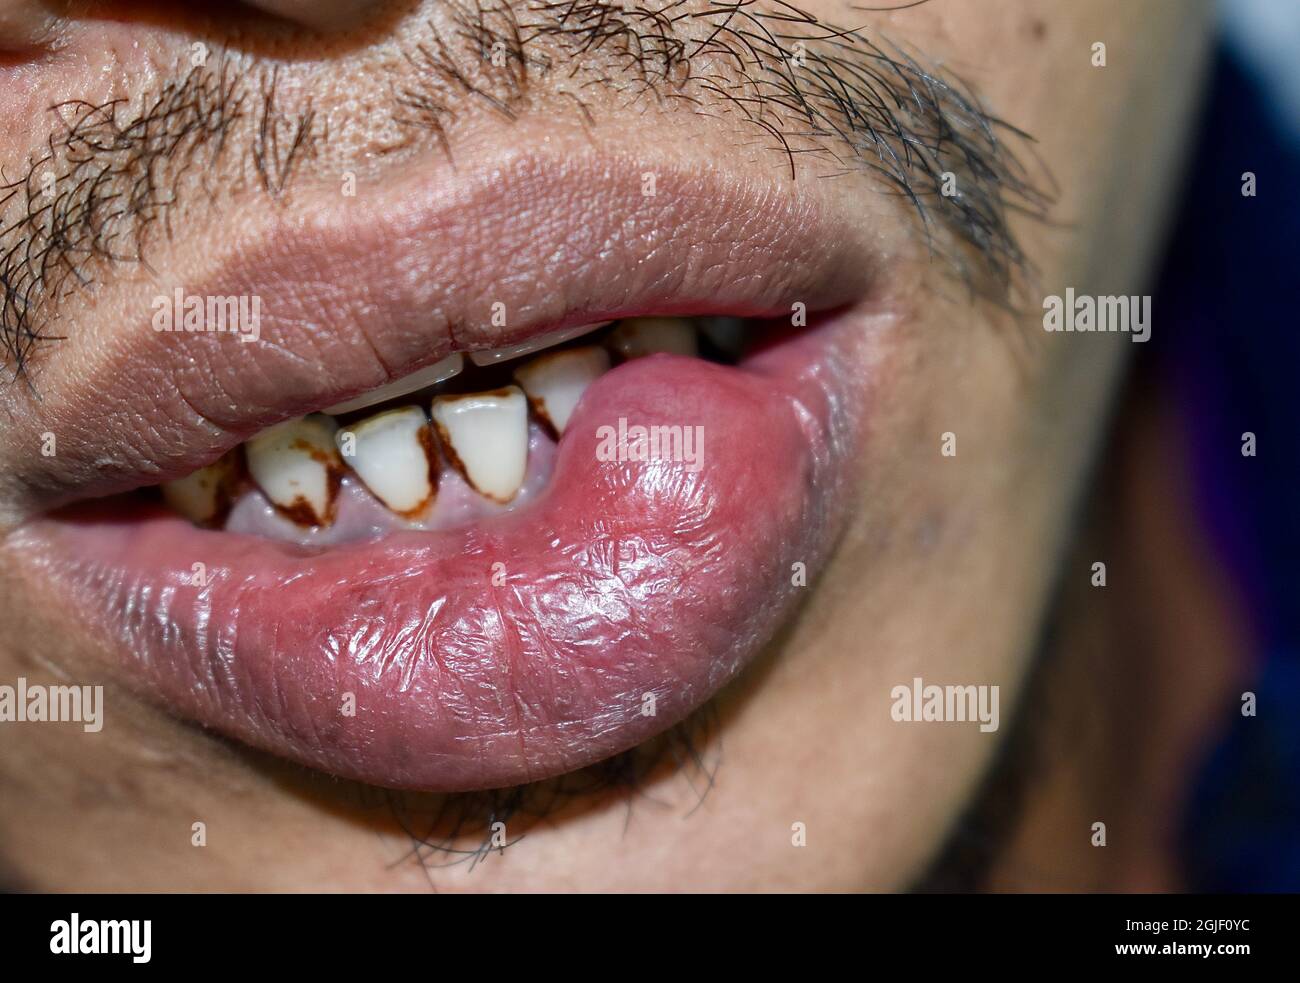 Abscess or cyst with pus at lower lip of Asian man Stock Photo - Alamy